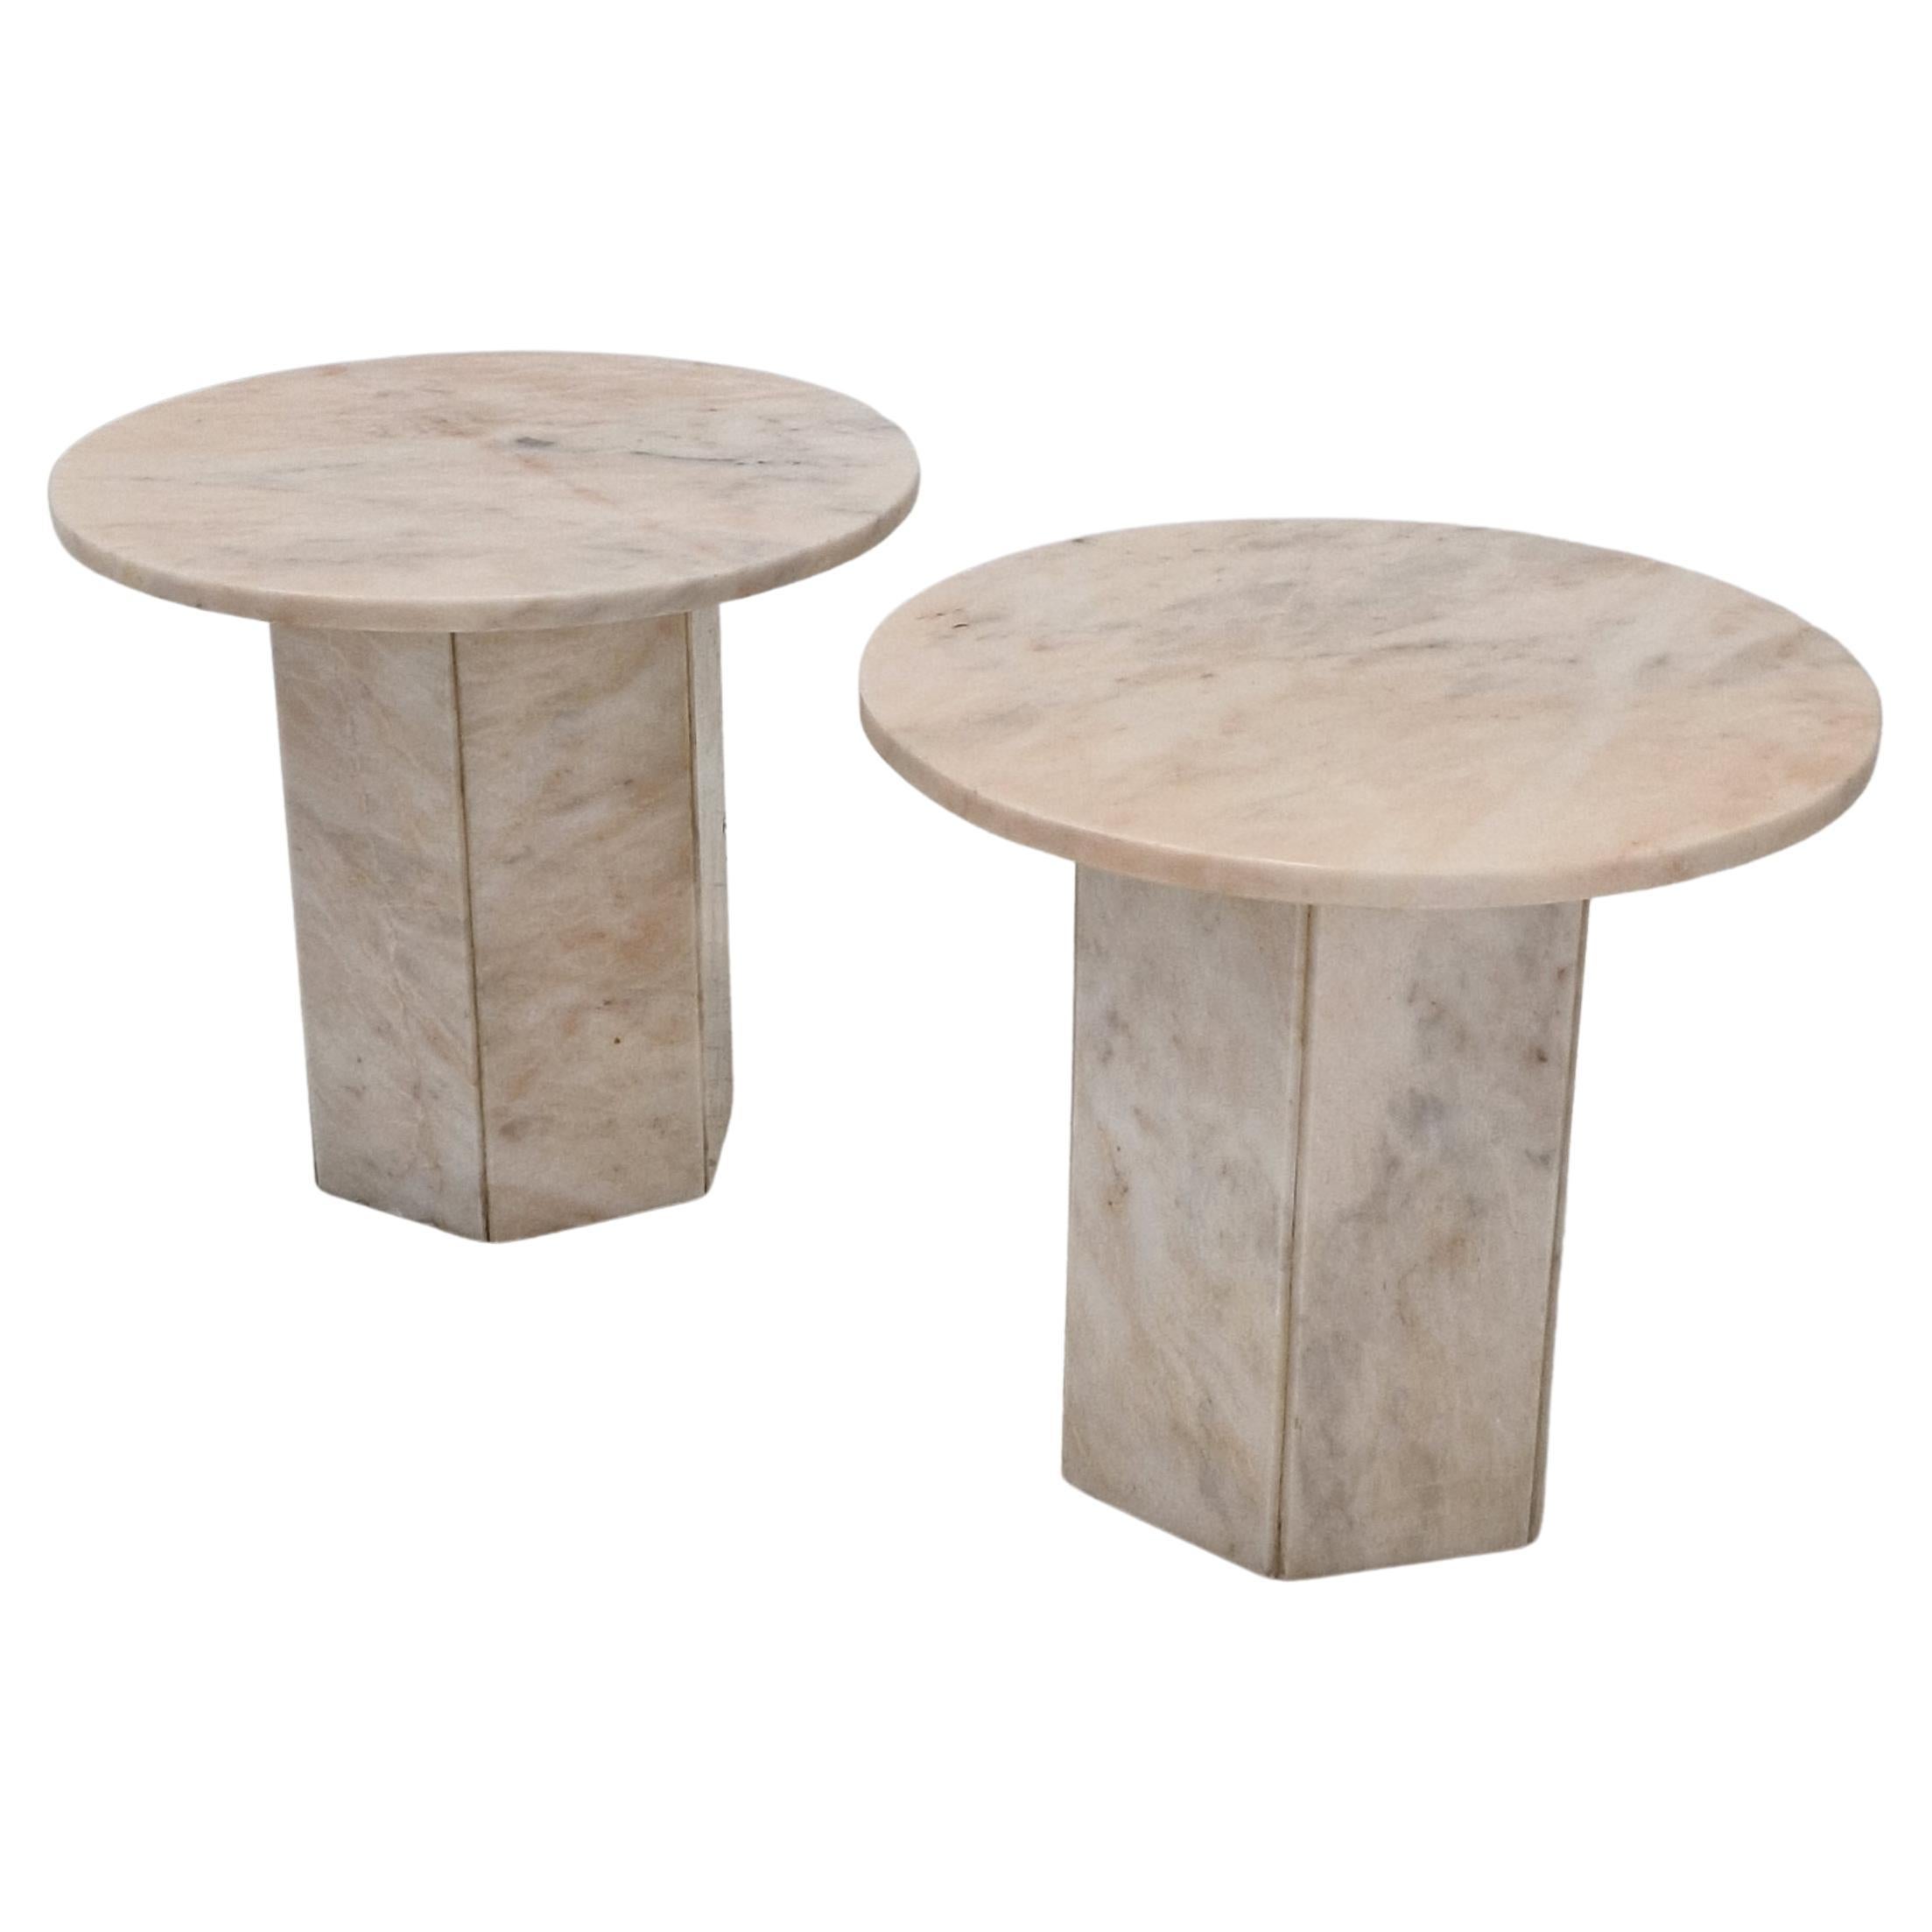 Set of 2 Italian Marble Side Tables, 1980s For Sale